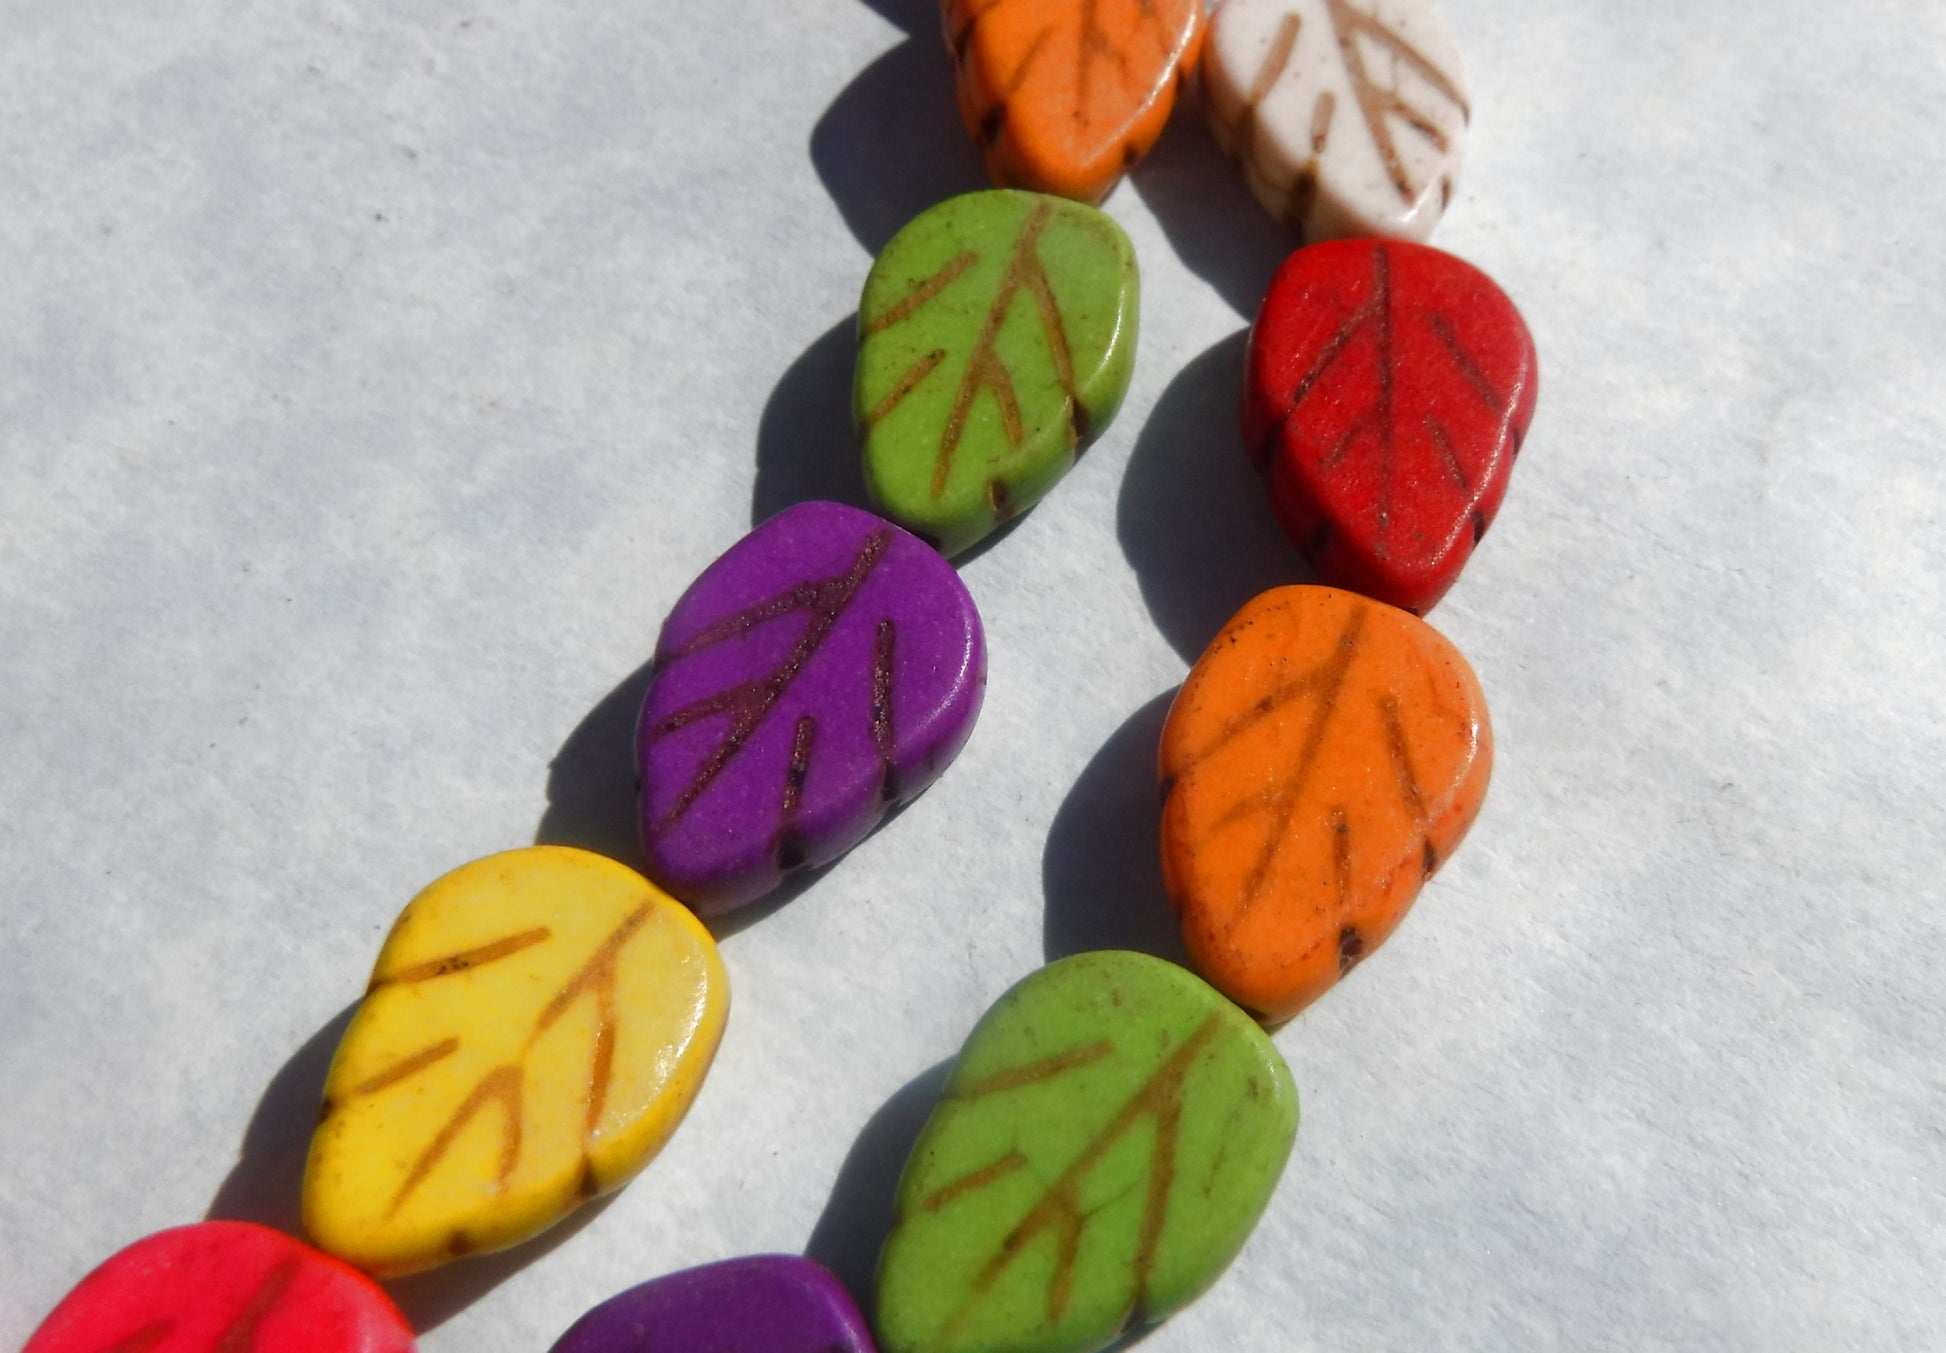 Colorful Leaf Stone Beads - 9mmx 13mm - Choose Half Strand or Full Strand - Use for Mosaics